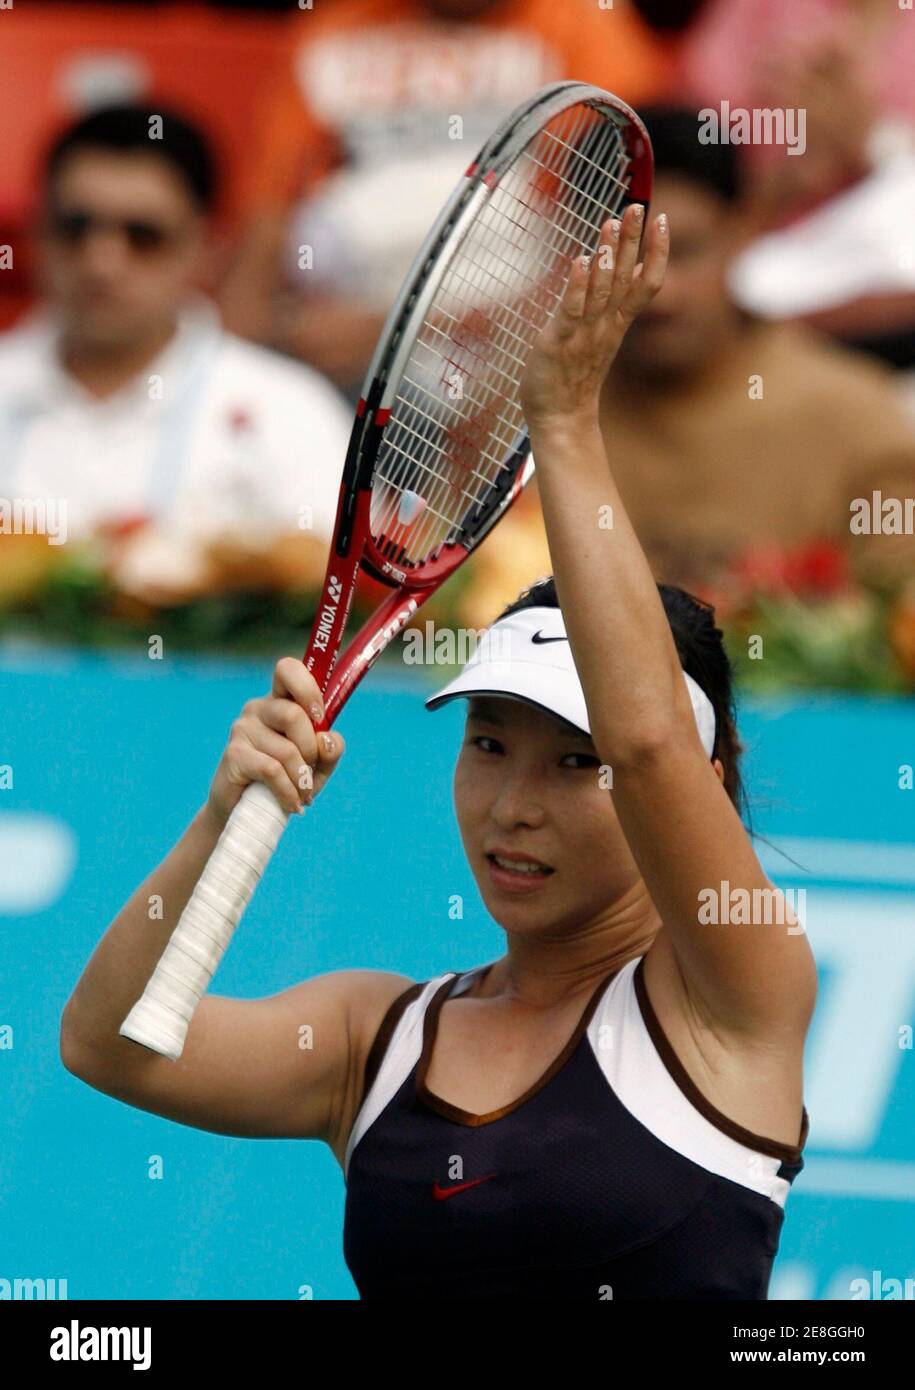 China's Zheng Jie reacts after winning the women's single tennis final against India's Sania Mirza  at the 15th Asian Games in Doha December 13, 2006.     REUTERS/Jason Reed  (QATAR) Stock Photo